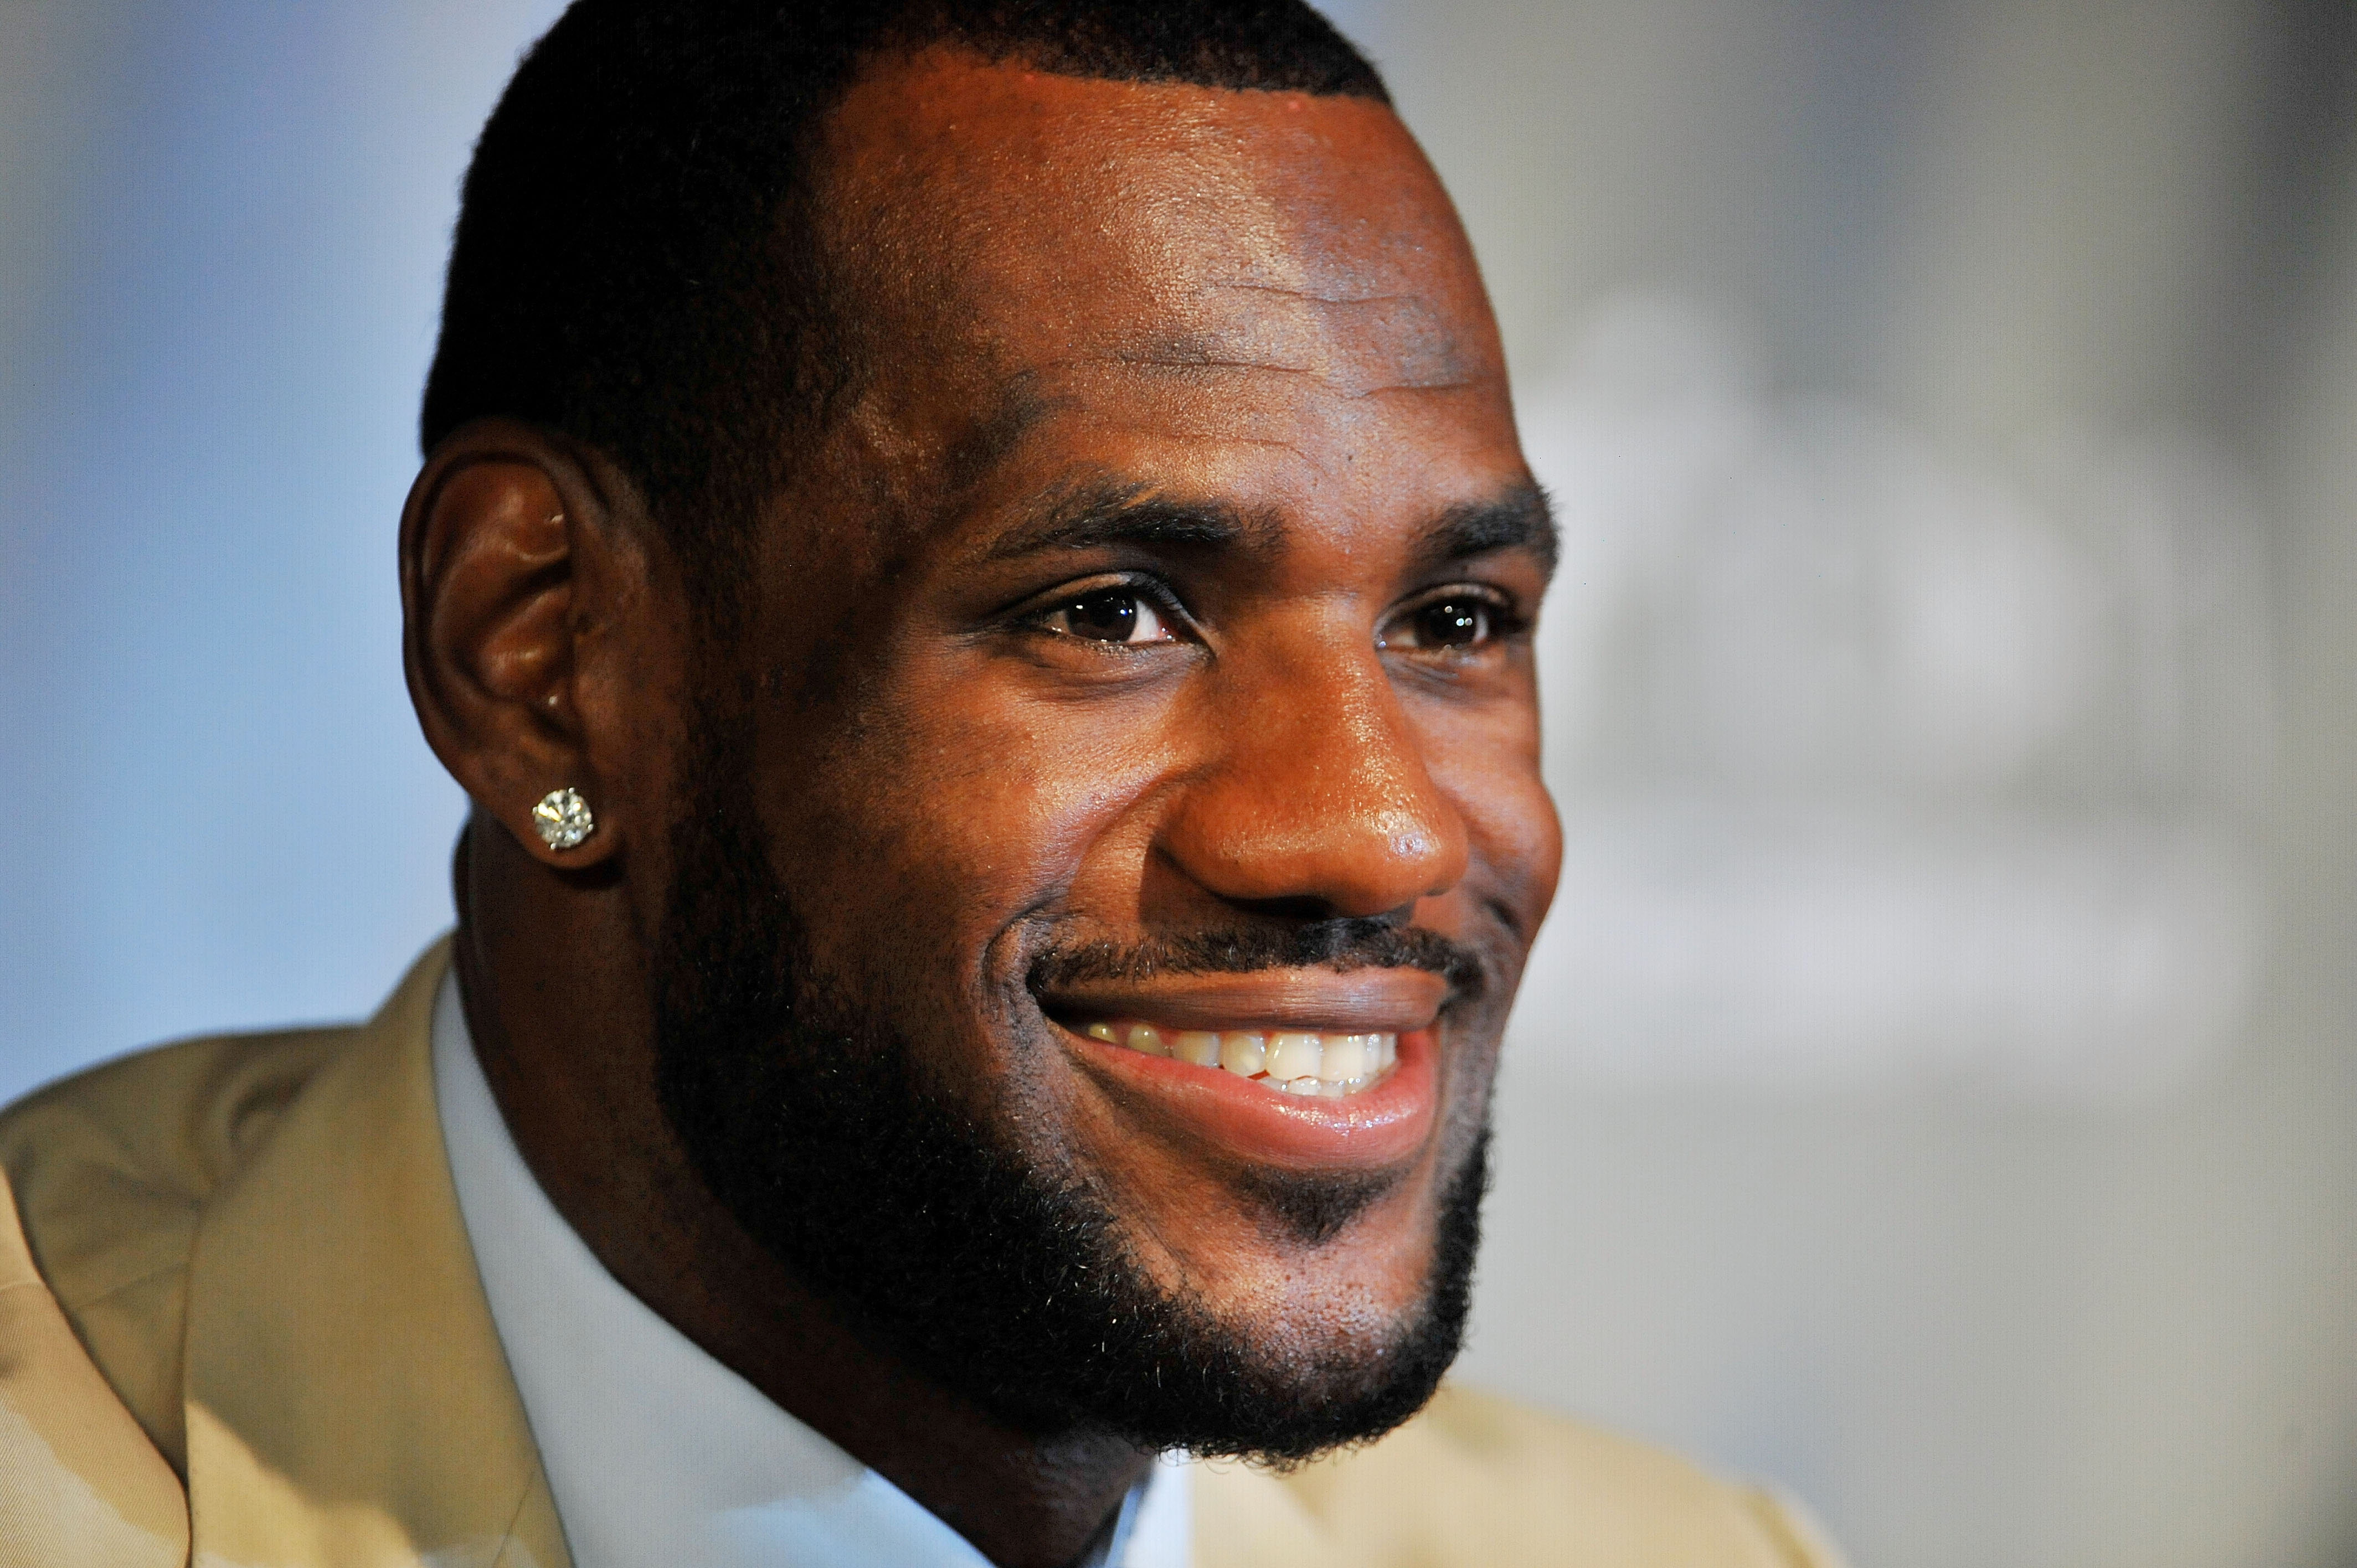 MIAMI - JULY 09:  LeBron James #6, of the Miami Heat smiles during a press conference after a welcome party at American Airlines Arena on July 9, 2010 in Miami, Florida.  (Photo by Doug Benc/Getty Images)